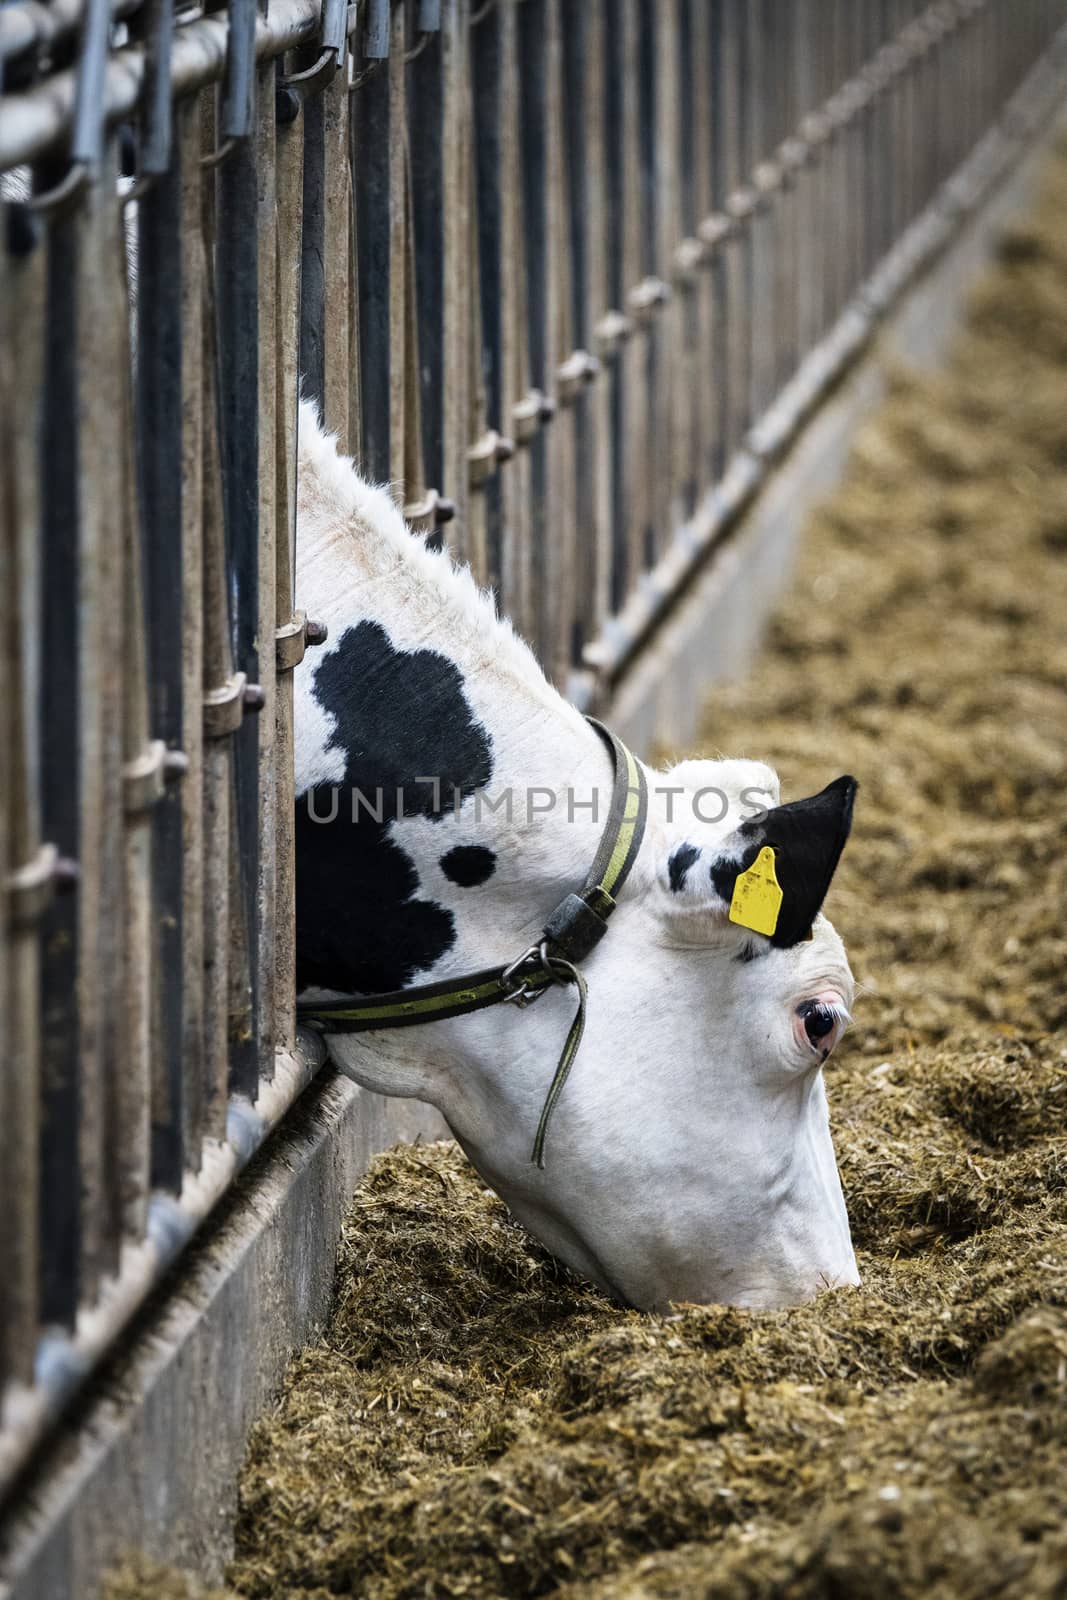 Cow in a stable eating food from behind the bars with a yellow tag in the ear